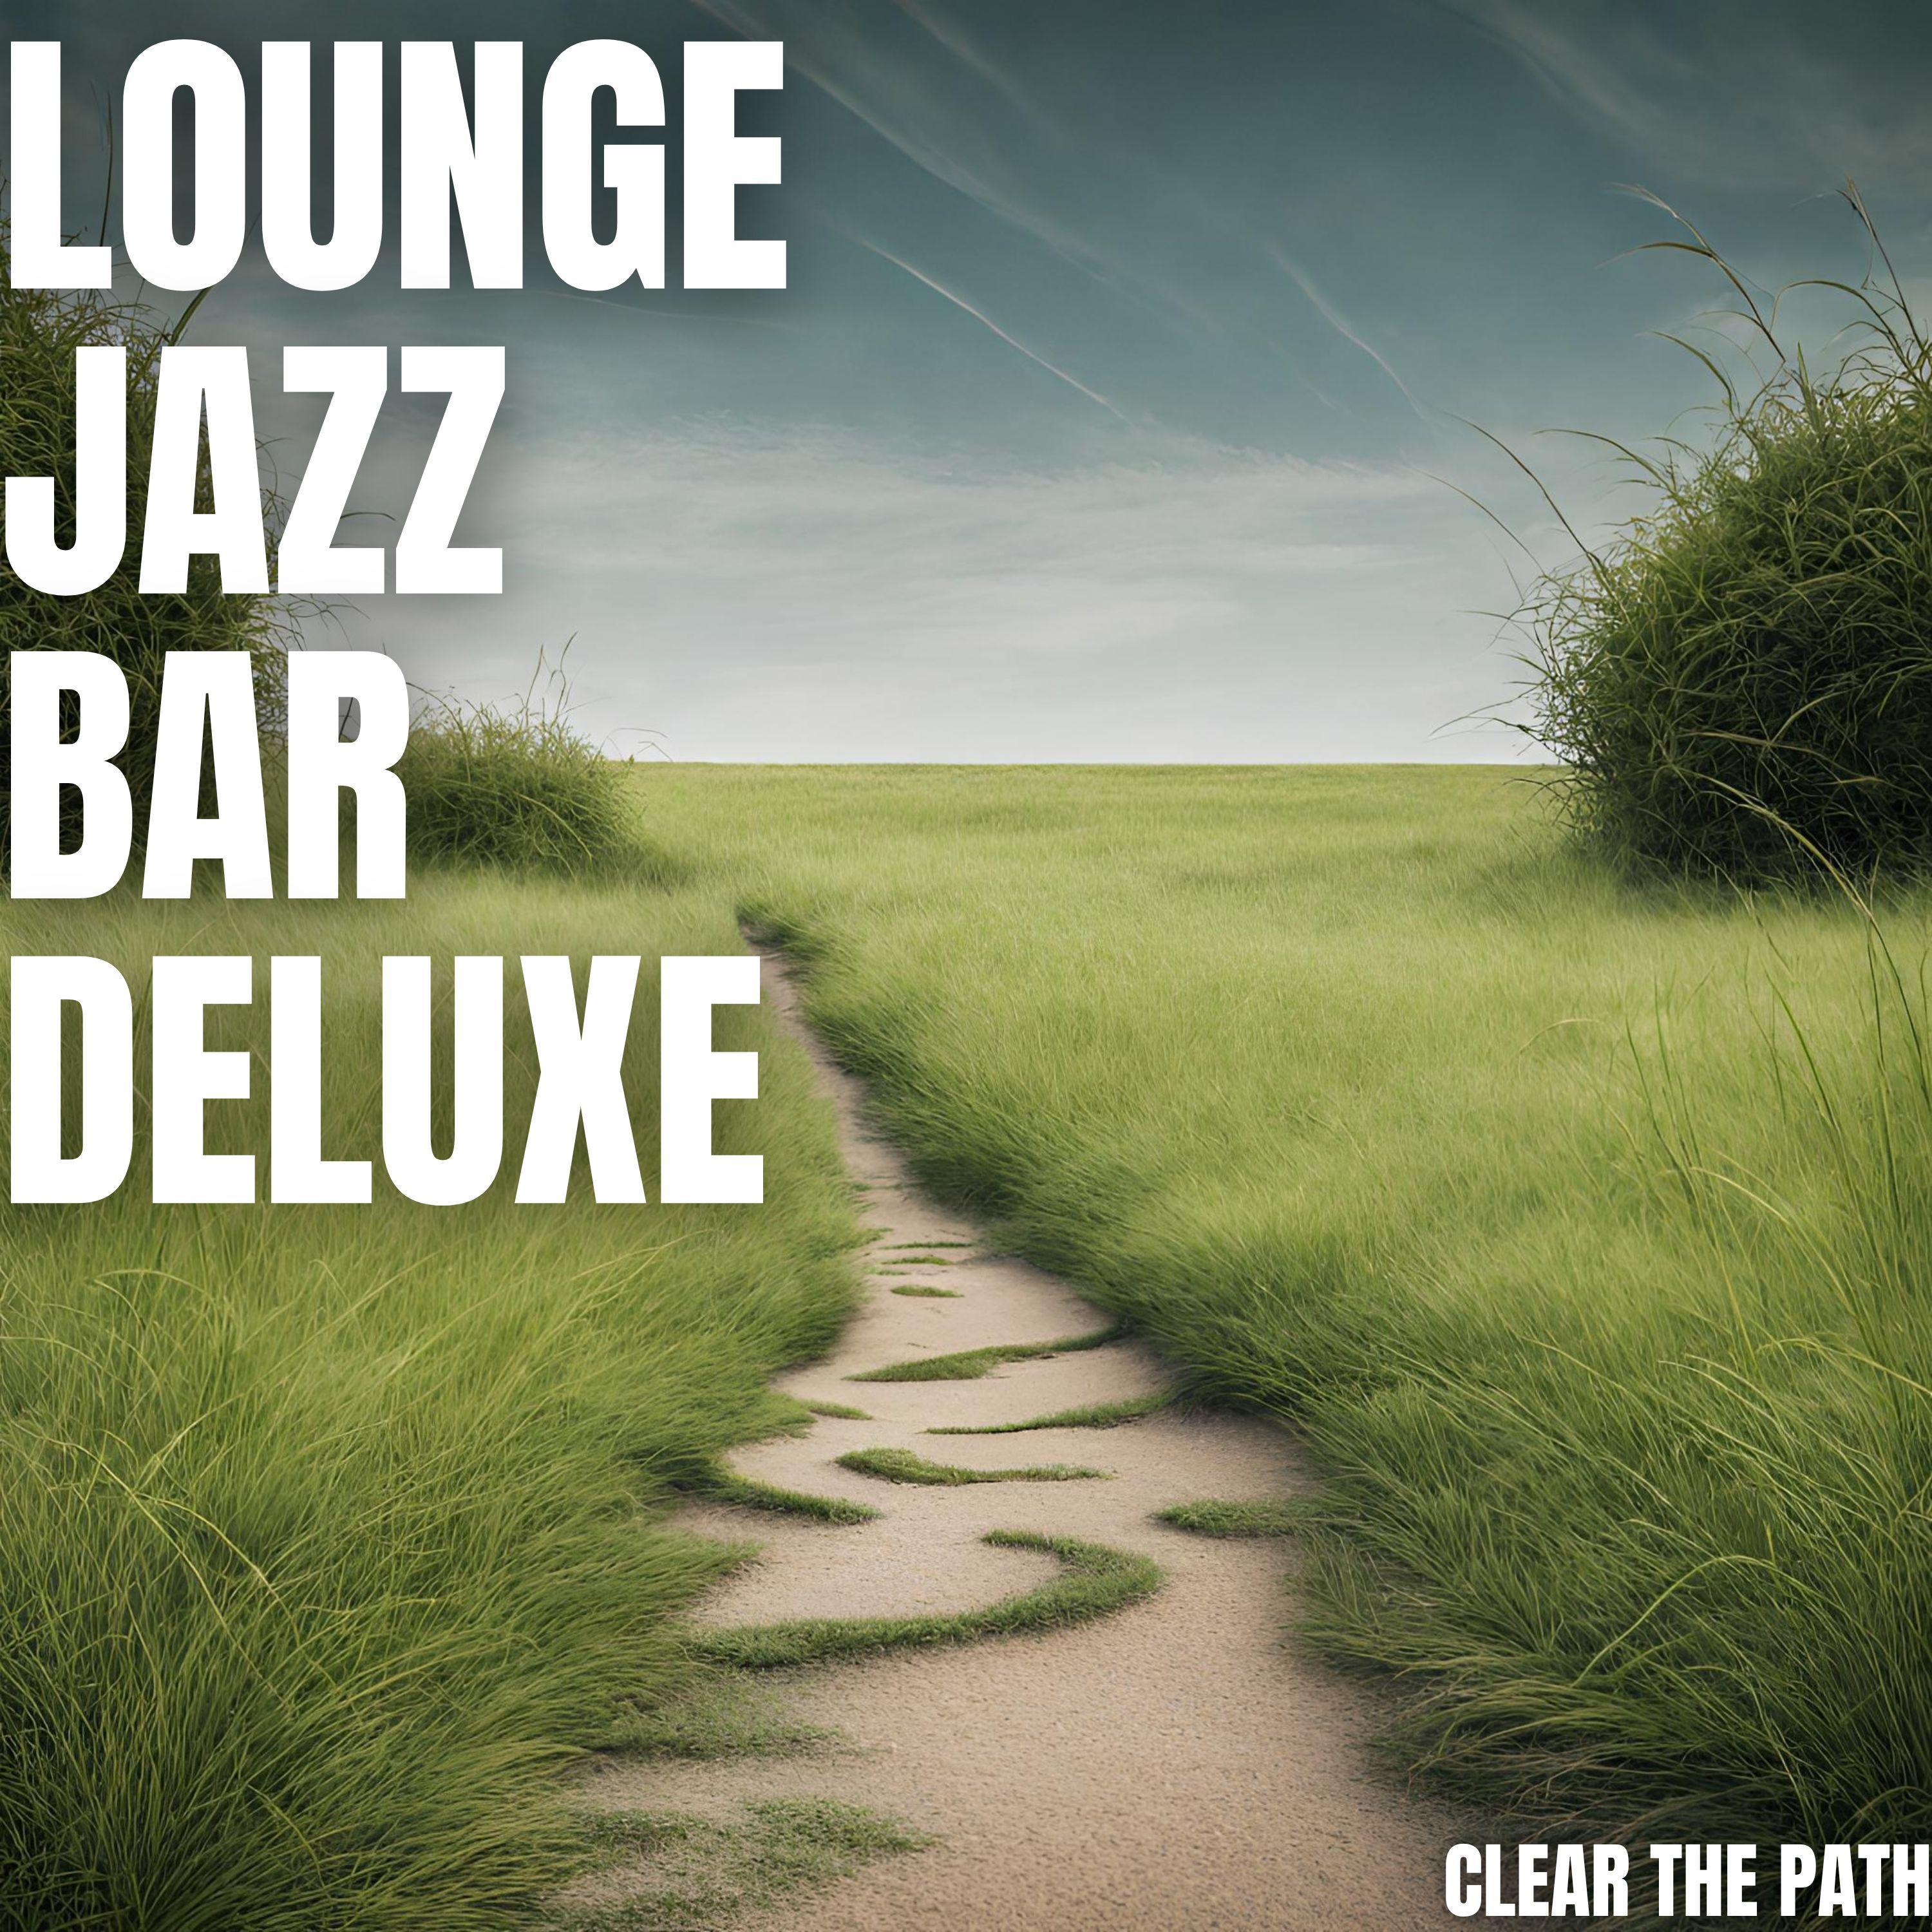 Lounge Jazz Bar Deluxe - Up With The Stars